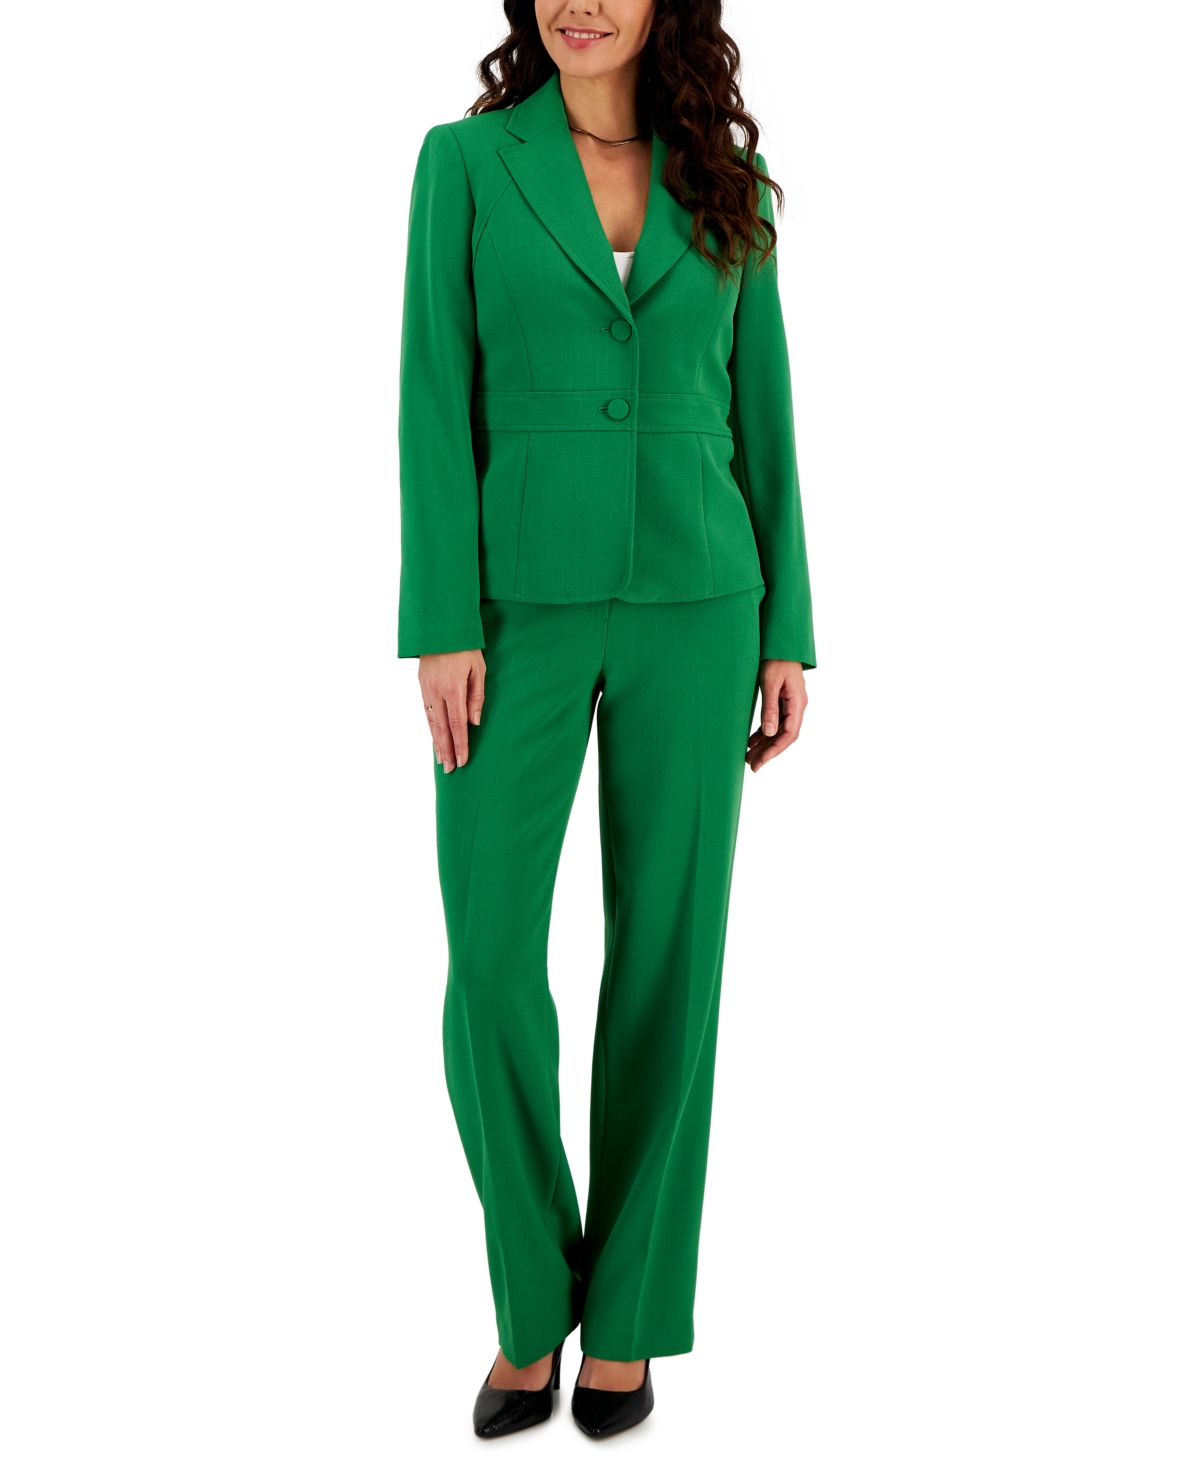 Le Suit Crepe Two-button Blazer & Pants, Regular And Petite Sizes In Verde